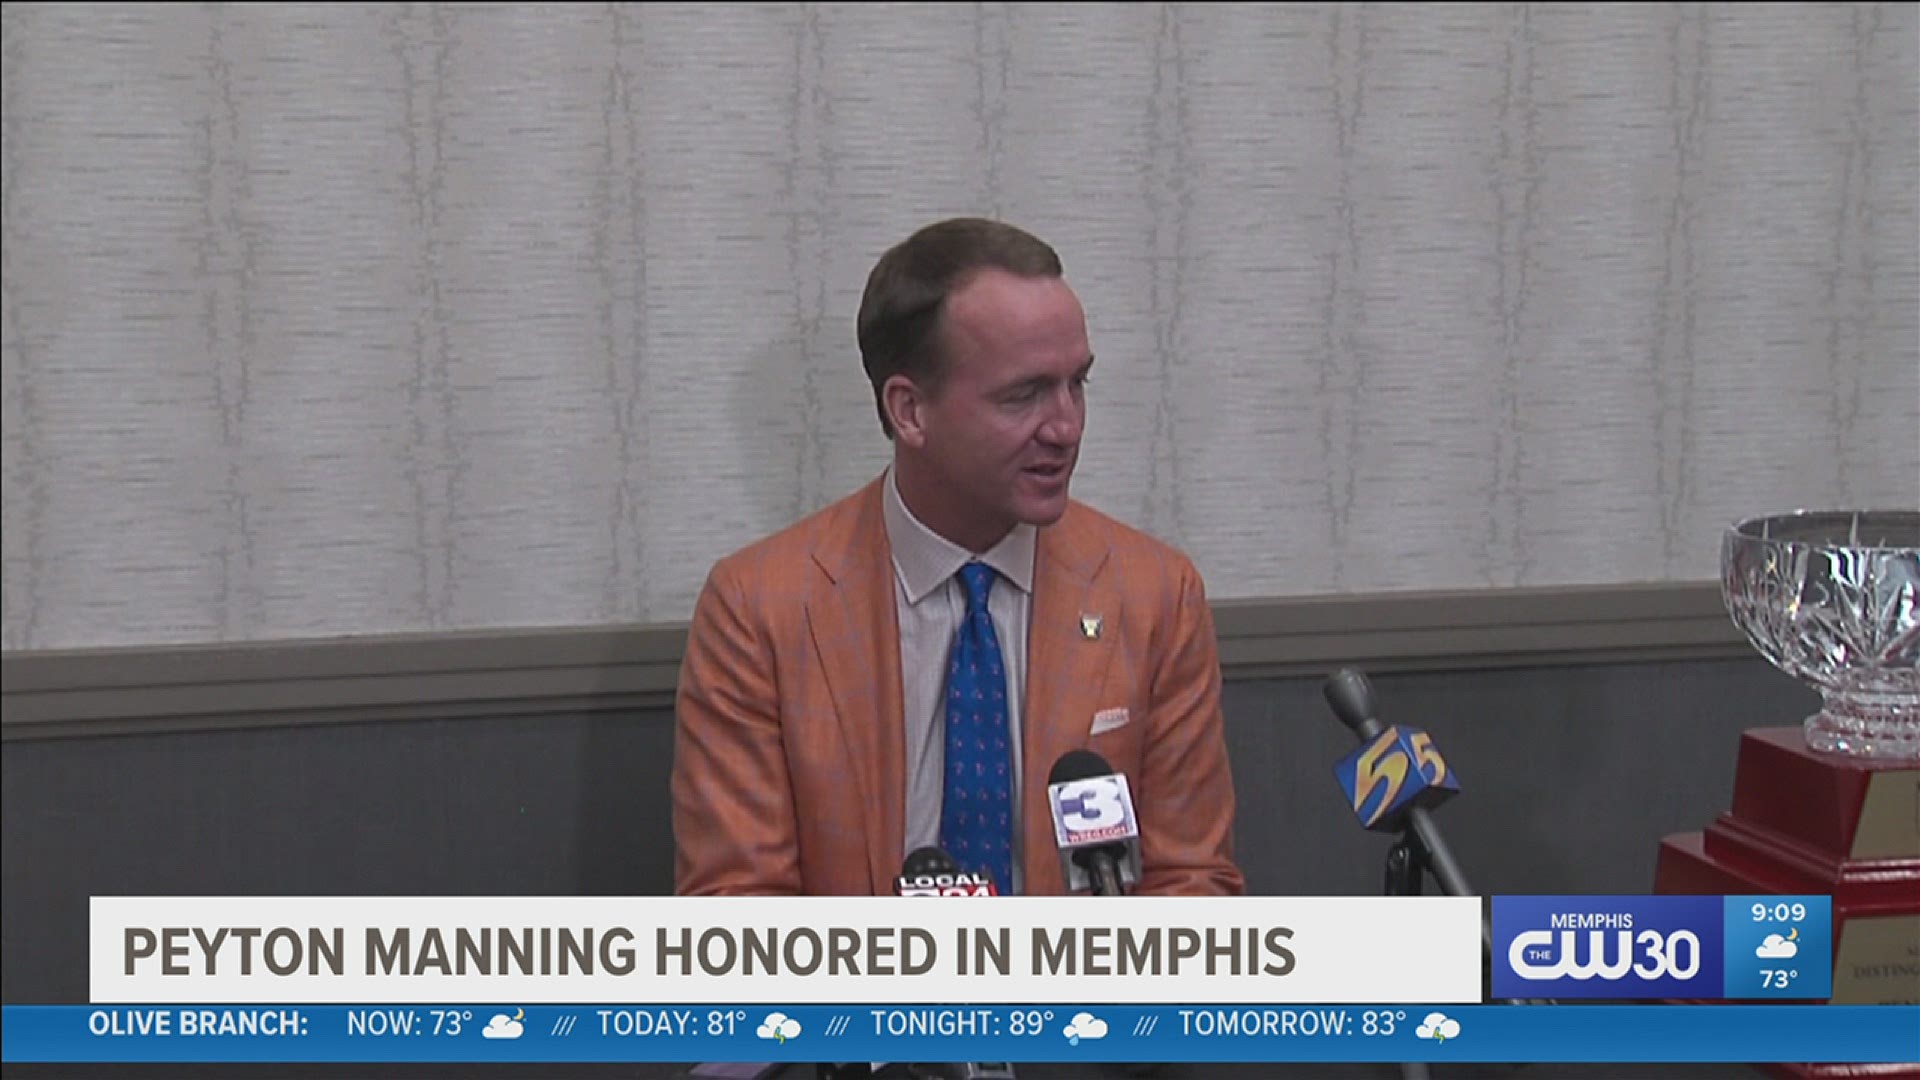 Peyton Manning made a trip back to Memphis over the weekend to receive the Autozone Liberty Bowl Distinguished Citizen Award.